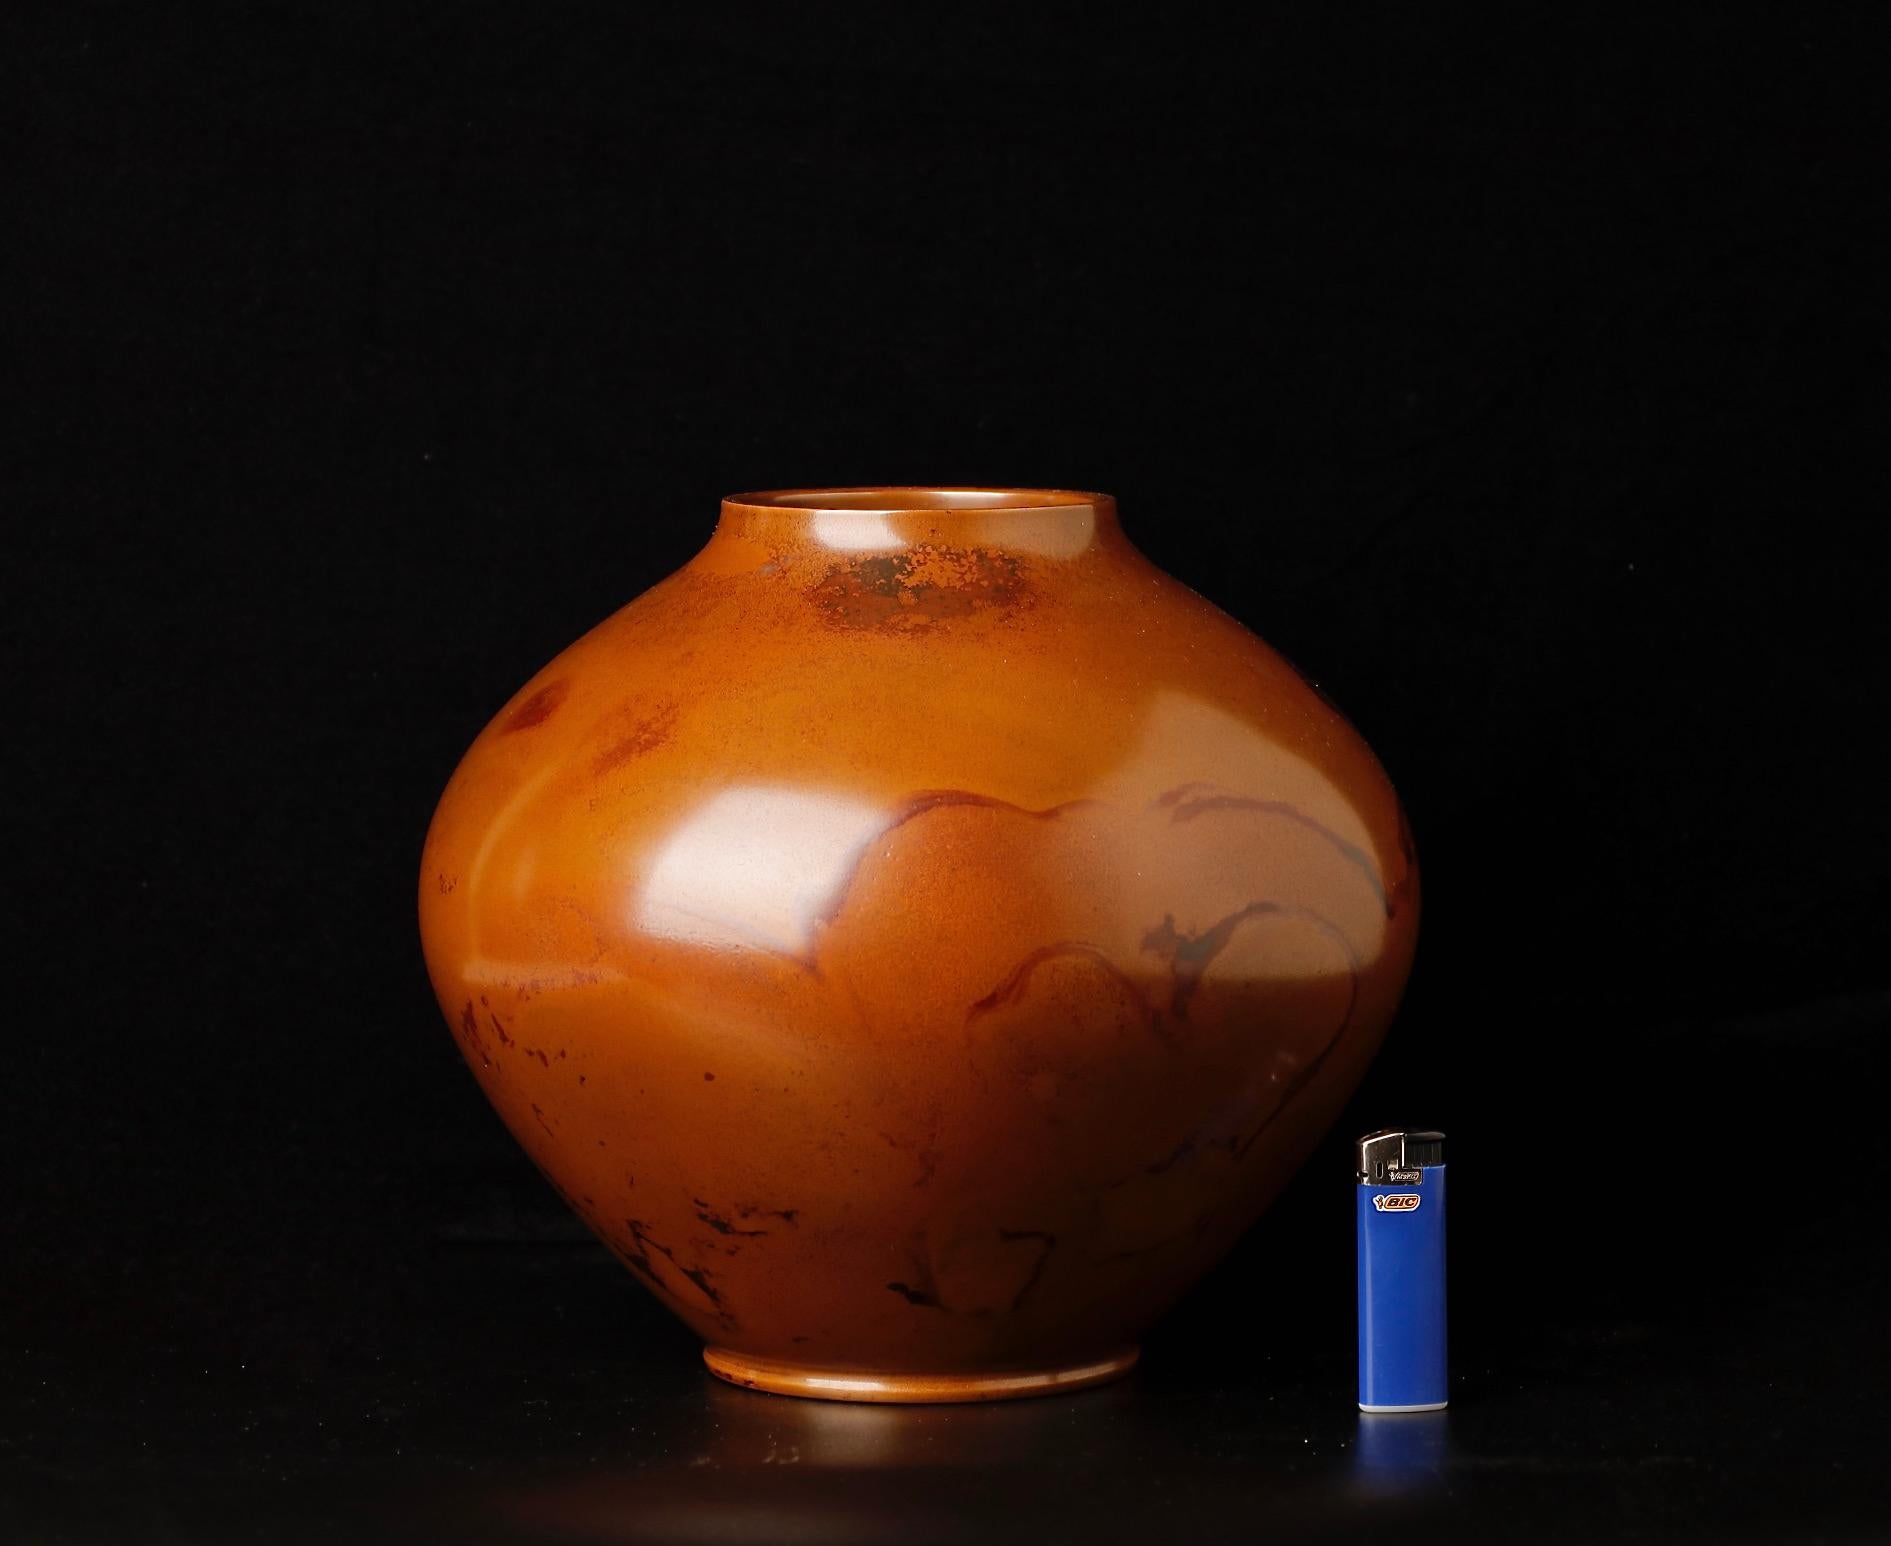 A Stunning Murashi-Do Bronze Vase by Renowned Artist Yoshino Takeji.

This stunning Murashi-Do bronze vase is a masterpiece by one of the leading metal artists of 20th century Japan, Yoshino Takeji. Takeji was born in Takaoka in 1920 and soon